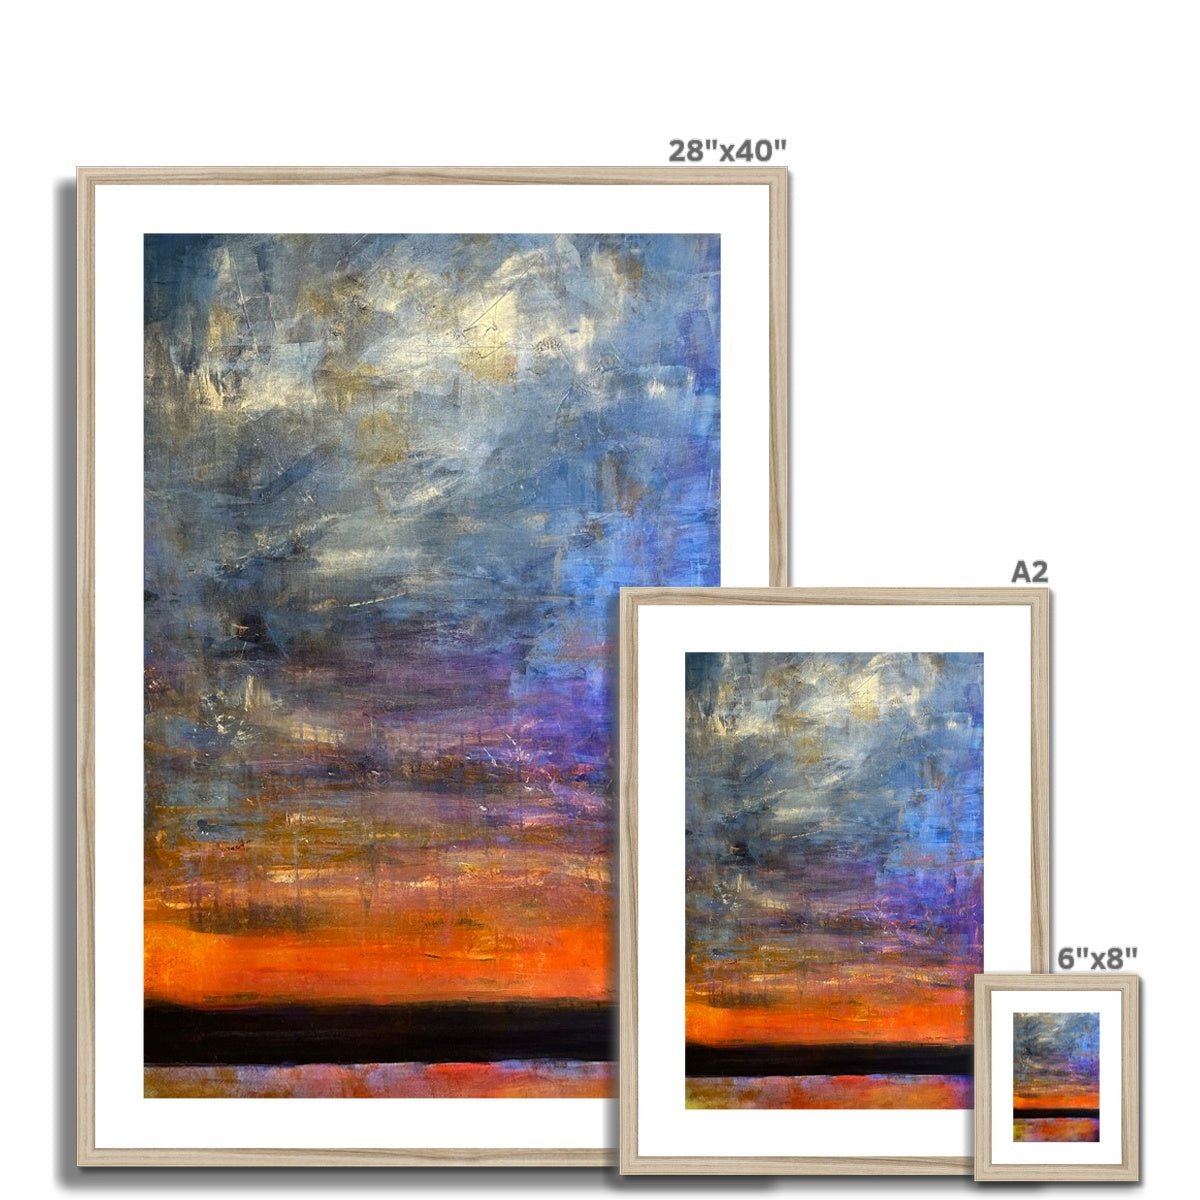 Horizon Dreams Abstract Painting | Framed & Mounted Prints From Scotland-Framed & Mounted Prints-Abstract & Impressionistic Art Gallery-Paintings, Prints, Homeware, Art Gifts From Scotland By Scottish Artist Kevin Hunter